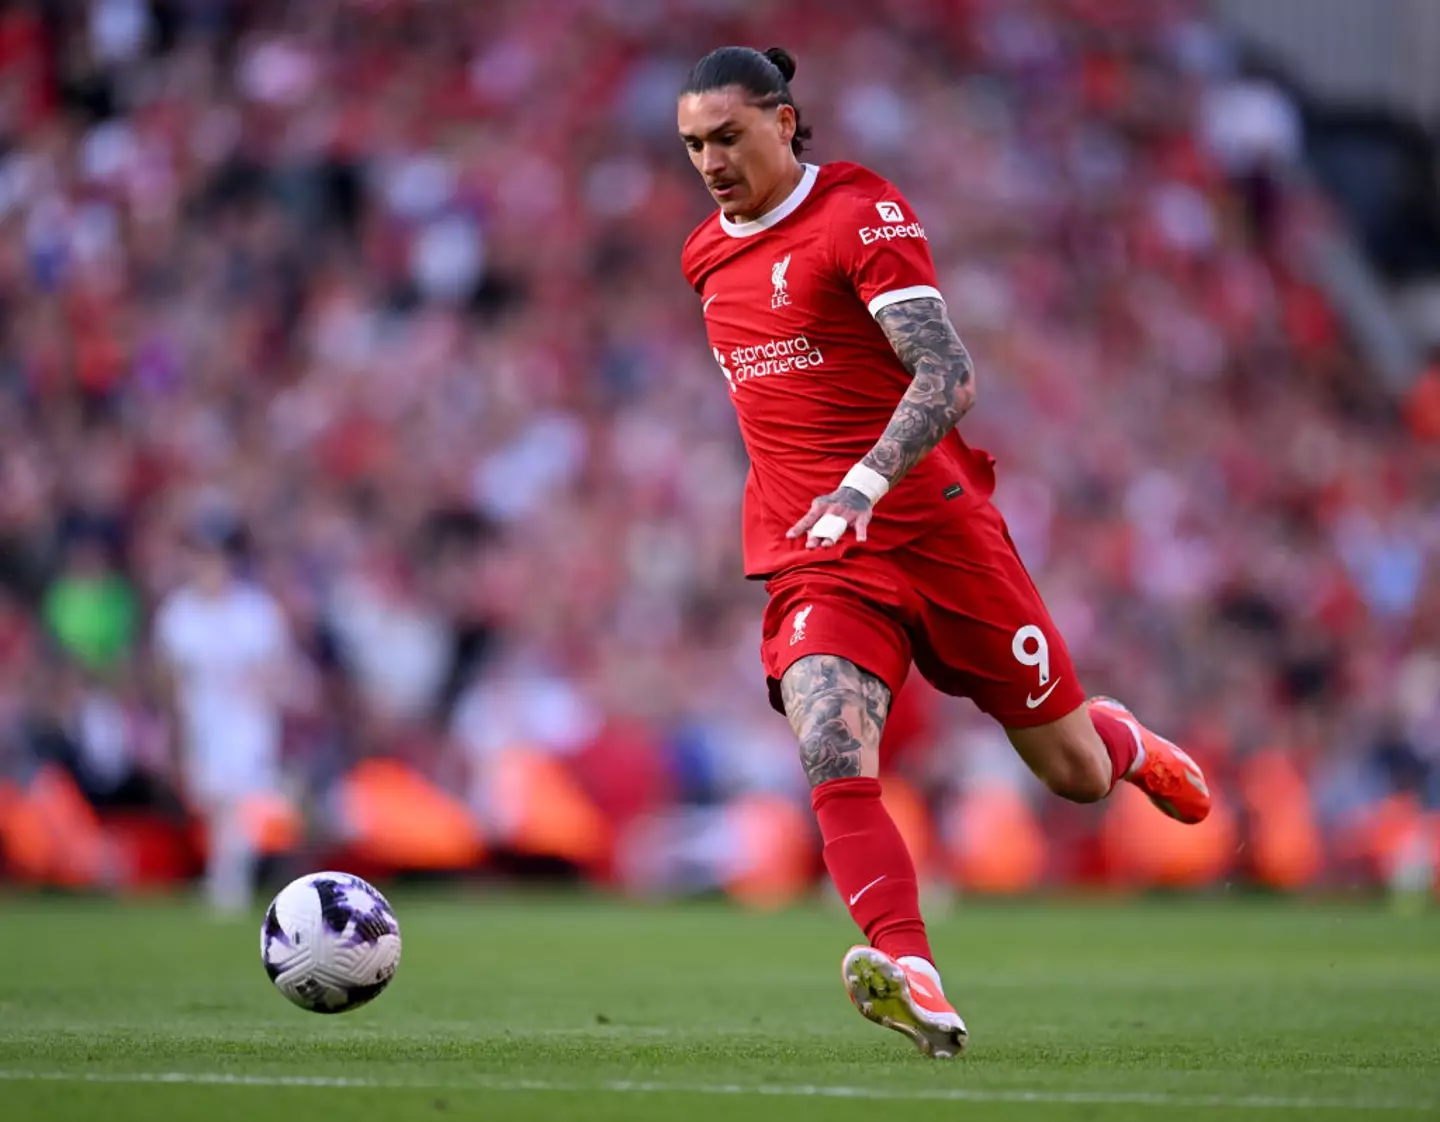 Darwin Nunez has been linked with a move away from Liverpool (Image: Getty)